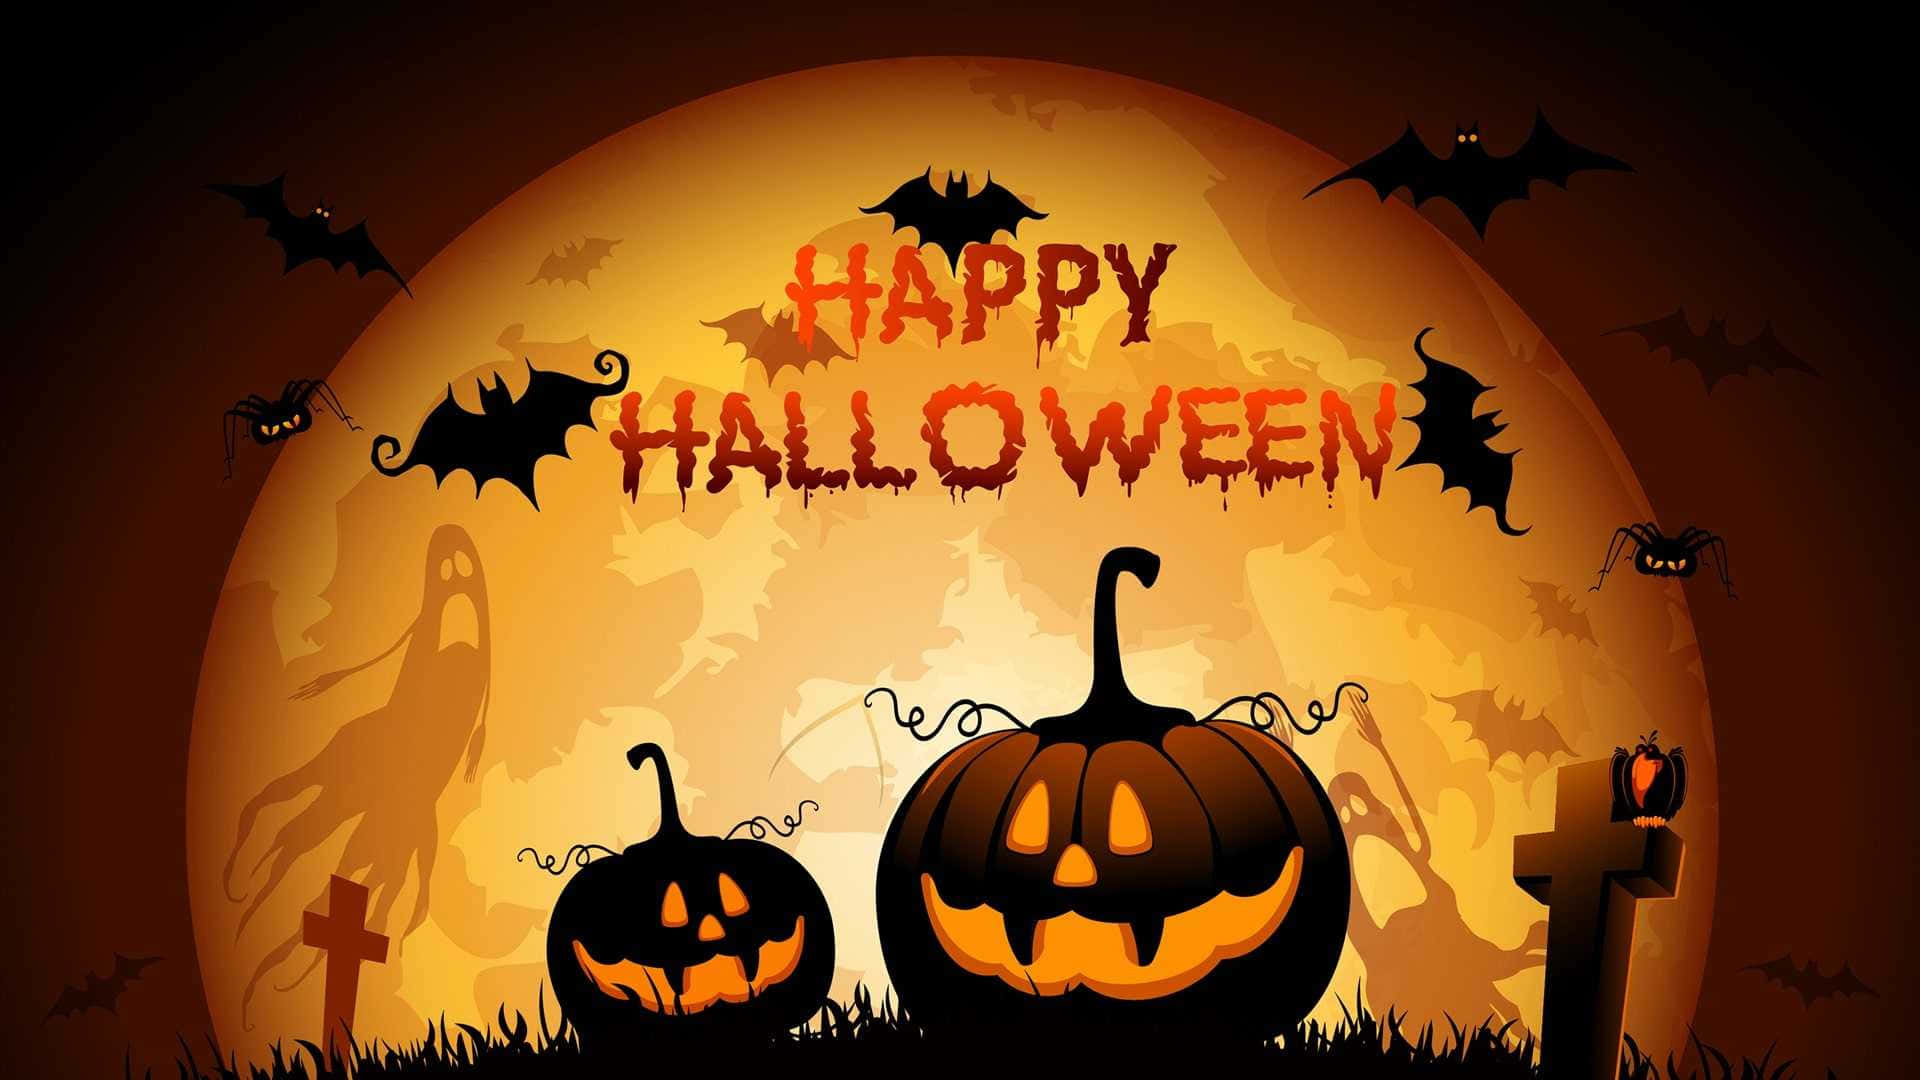 Celebrate Halloween with bright and shining oranges Wallpaper